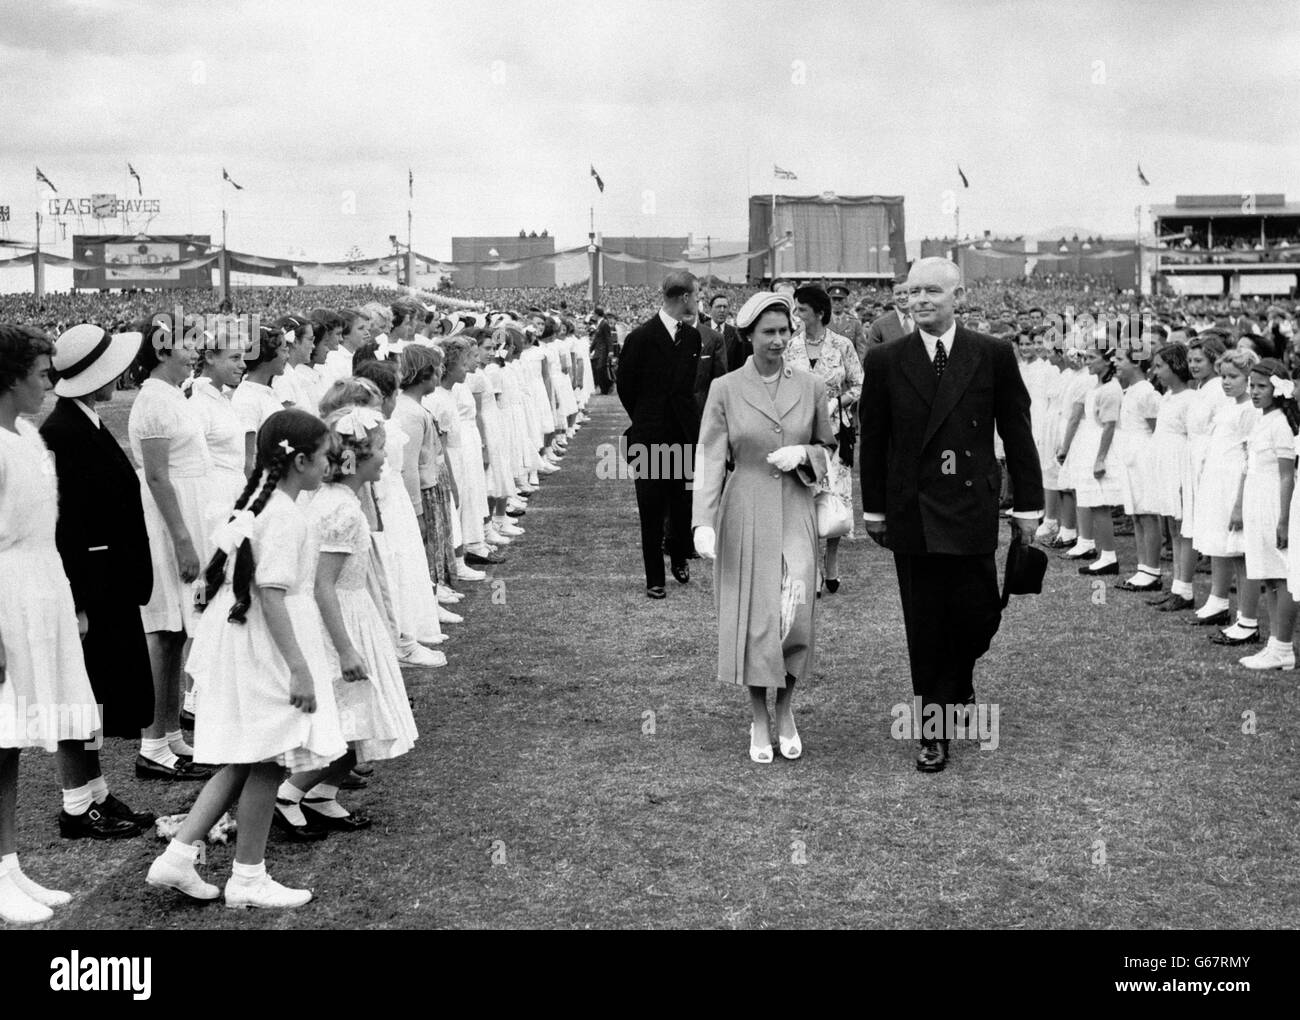 White-clad children curtsey to the Queen as she walks through the guard of honour mounted for her visit to the gigantic youth rally at Wayside Oval, the Adelaide cricket ground, South Australia. The rally was the largest of its kind staged during the Royal tour of the Commonwealth. Stock Photo